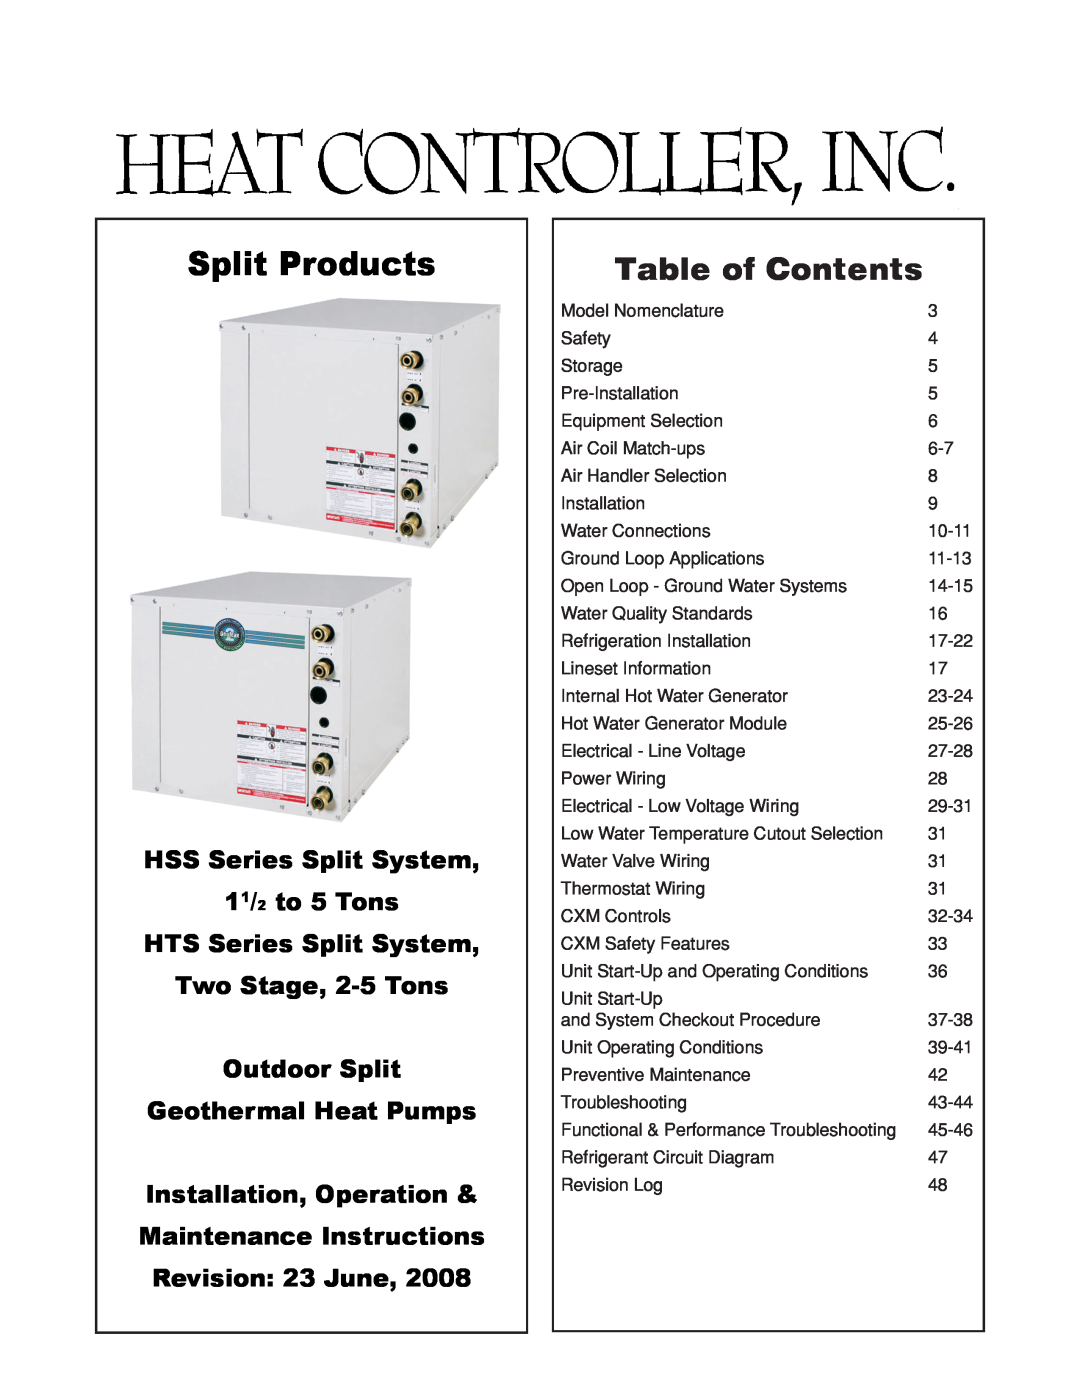 Heat Controller manual Split Products, Table of Contents, HSS Series Split System 11/2 to 5 Tons 